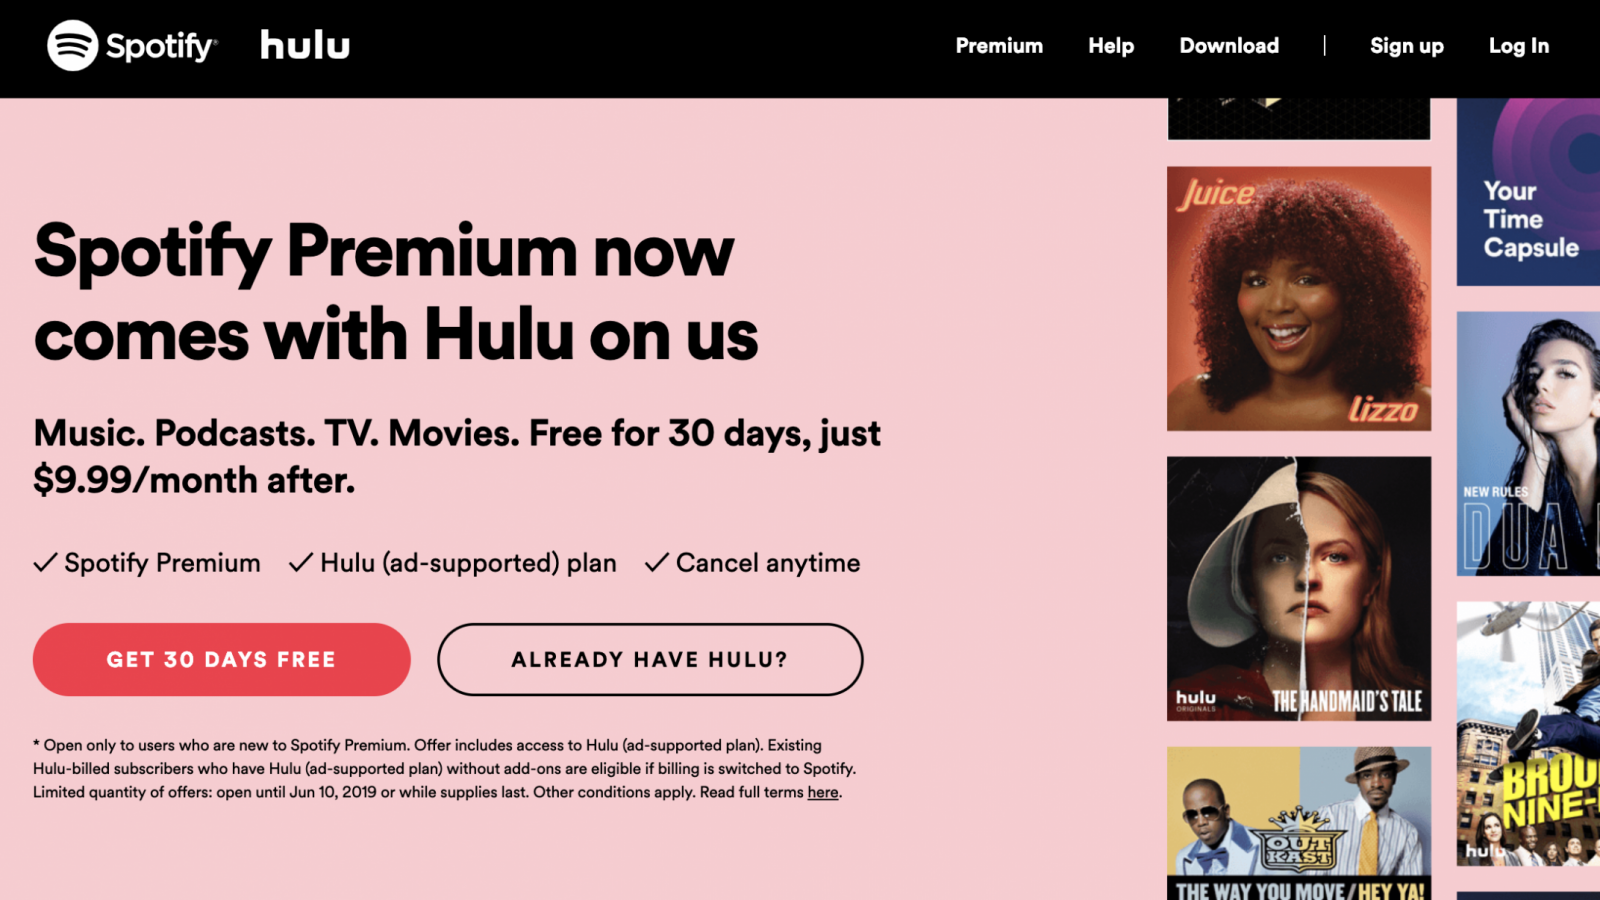 Do You Get A Free Hulu Account With Spotify Premium